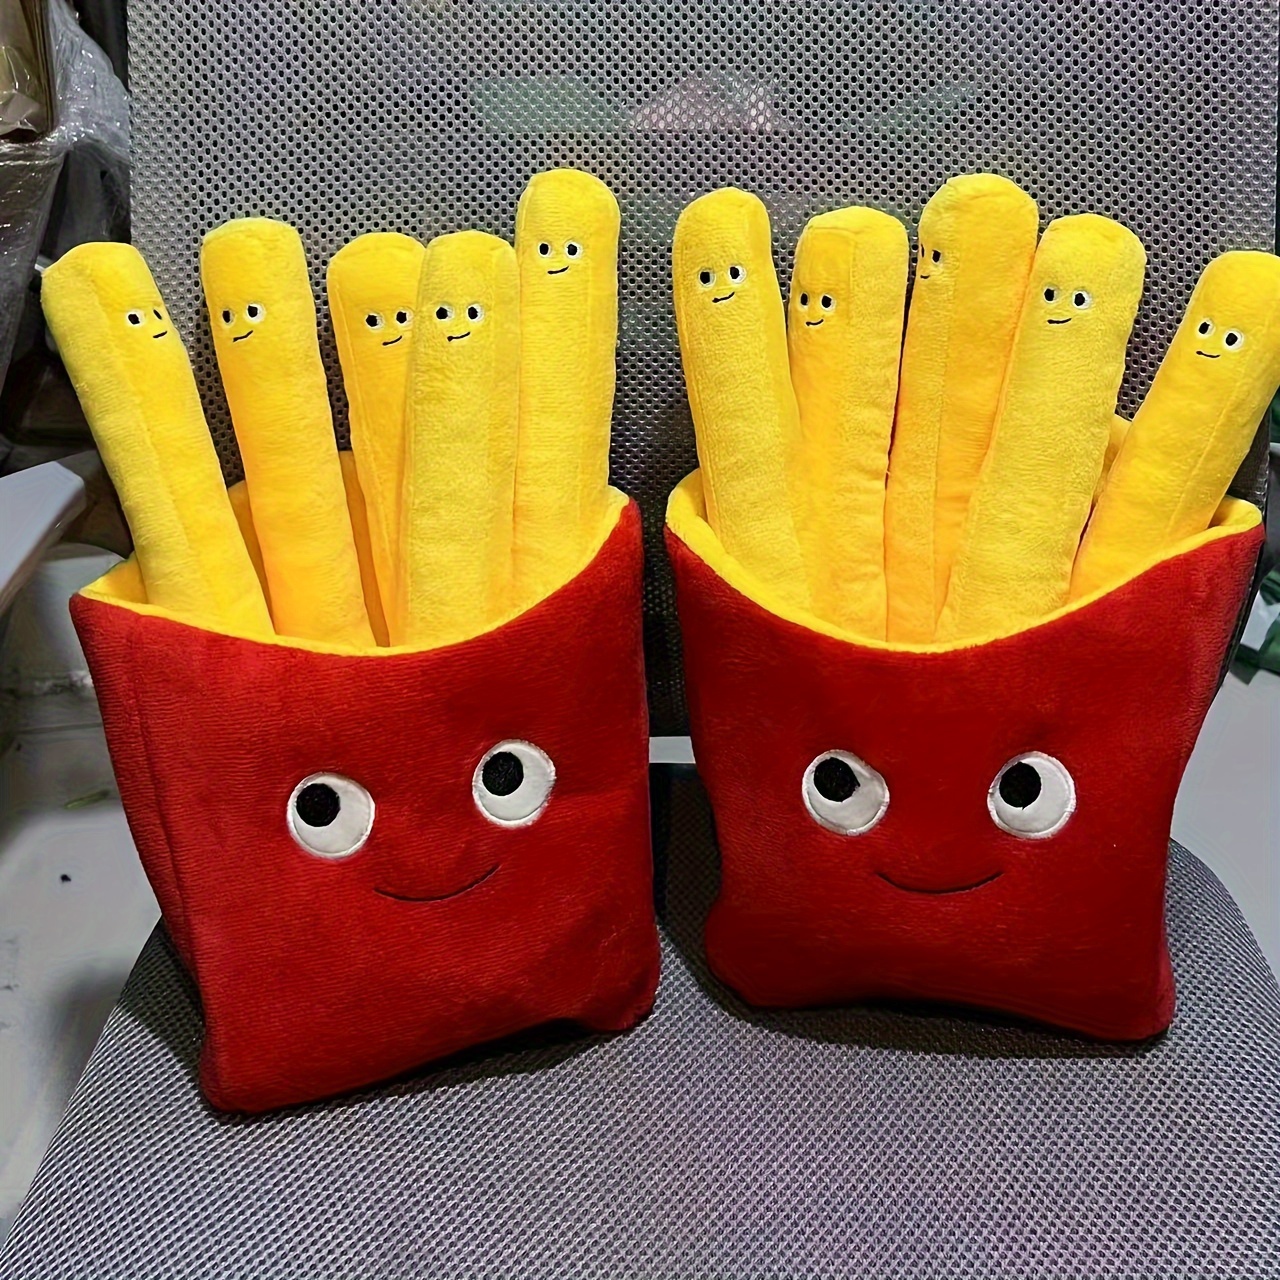 1pc Plush Stuffed Toy - Emotional Support Fries Smile Face, Home & Auto  Decorative Sofa Pillow, Pretend Play Fries Shaped Cushion Accessories For  Kids